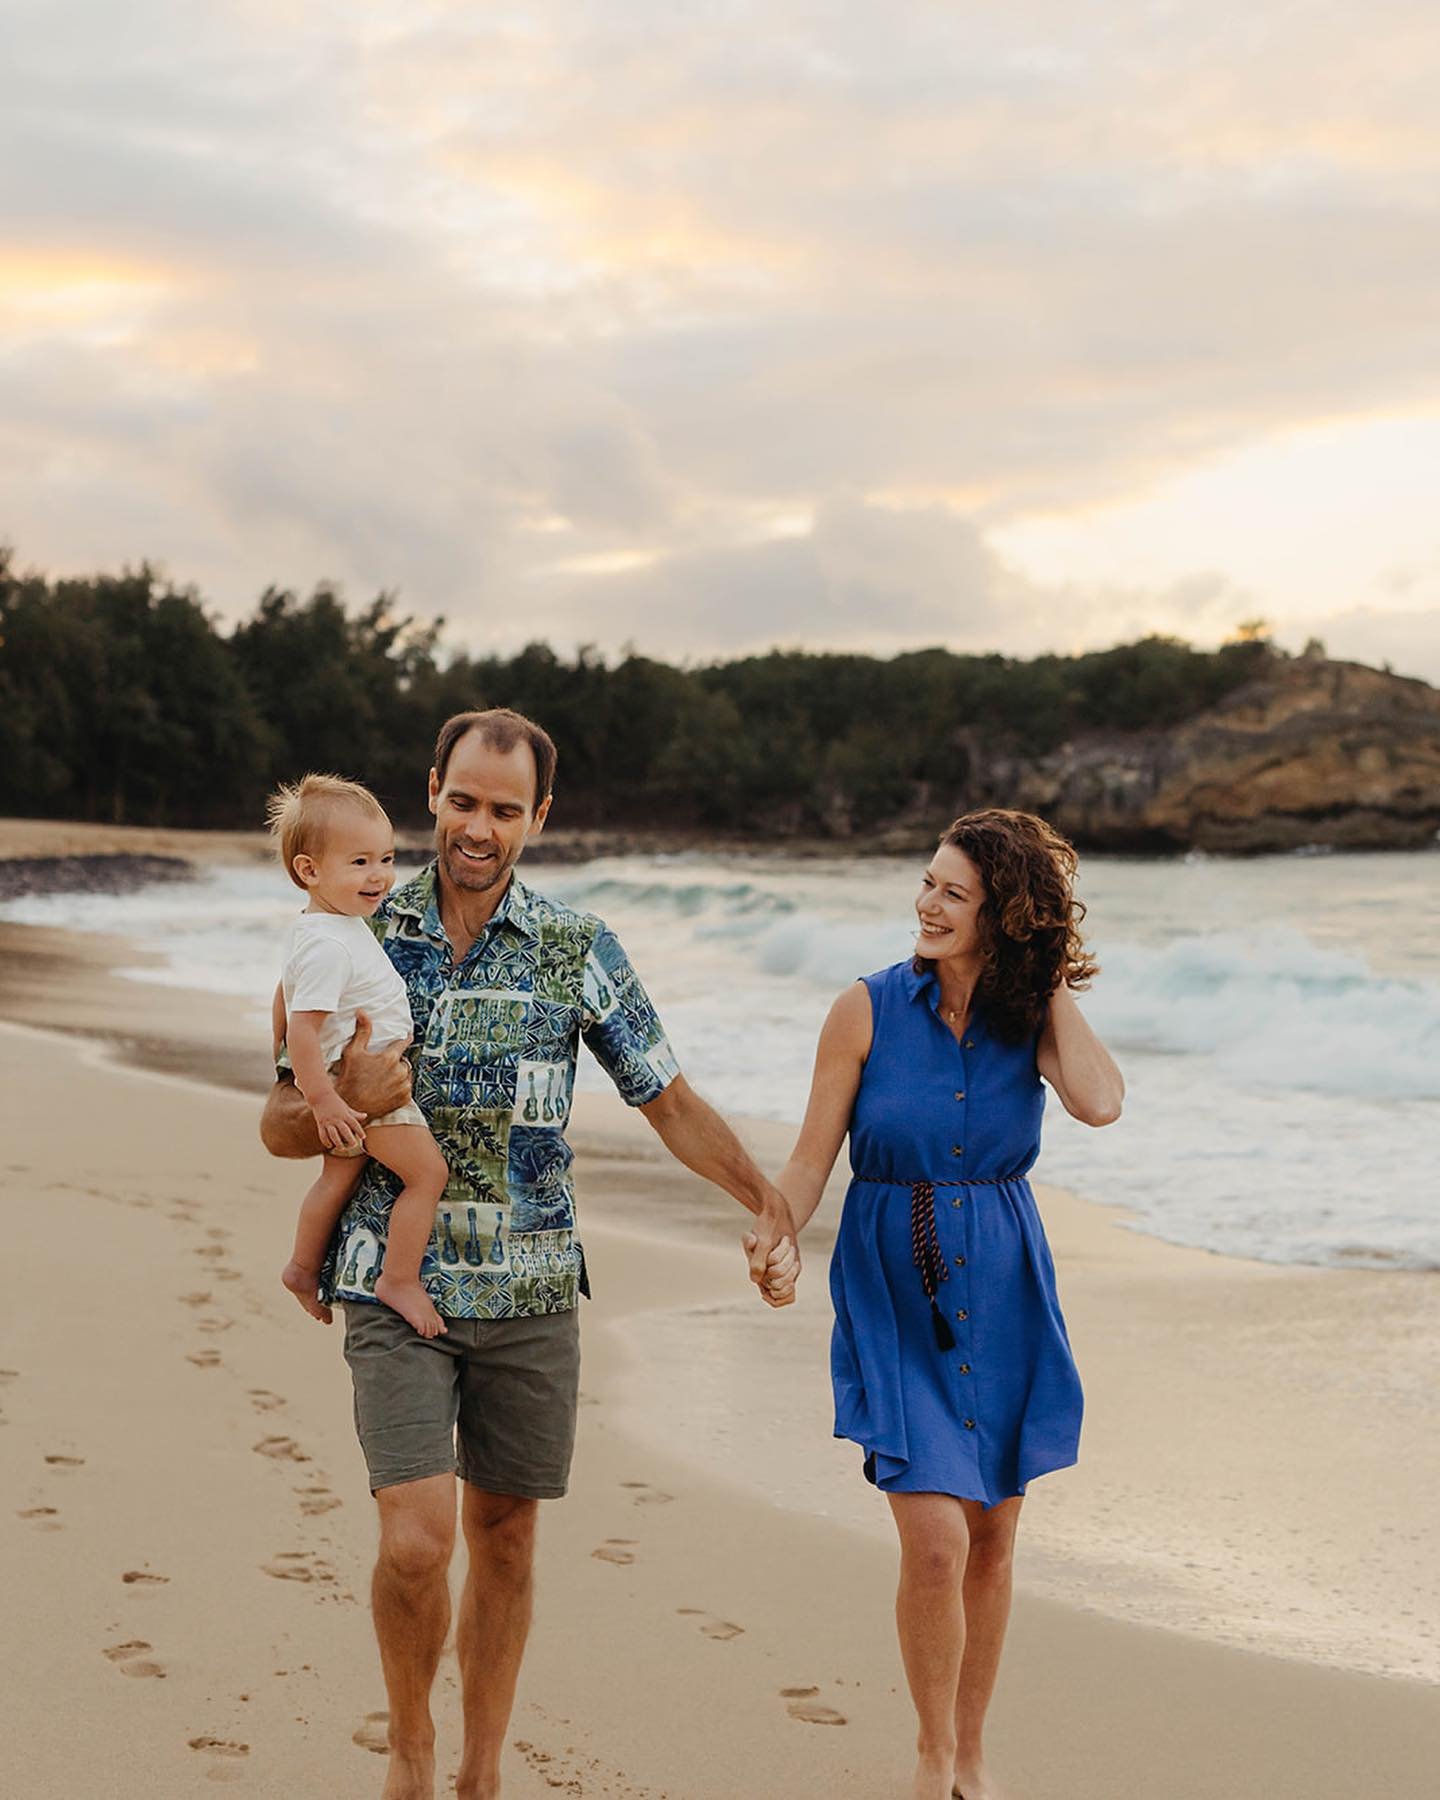 Much gratitude to @prudence.fontaine with @kauaifamilyphoto for our beautiful and treasured family photos. It was early and insanely windy so I was a bit out of sorts but so happy we captured some beautiful moments. Thank you, Pru! 🙏🏻❤️🌈
.
.
.
#fa